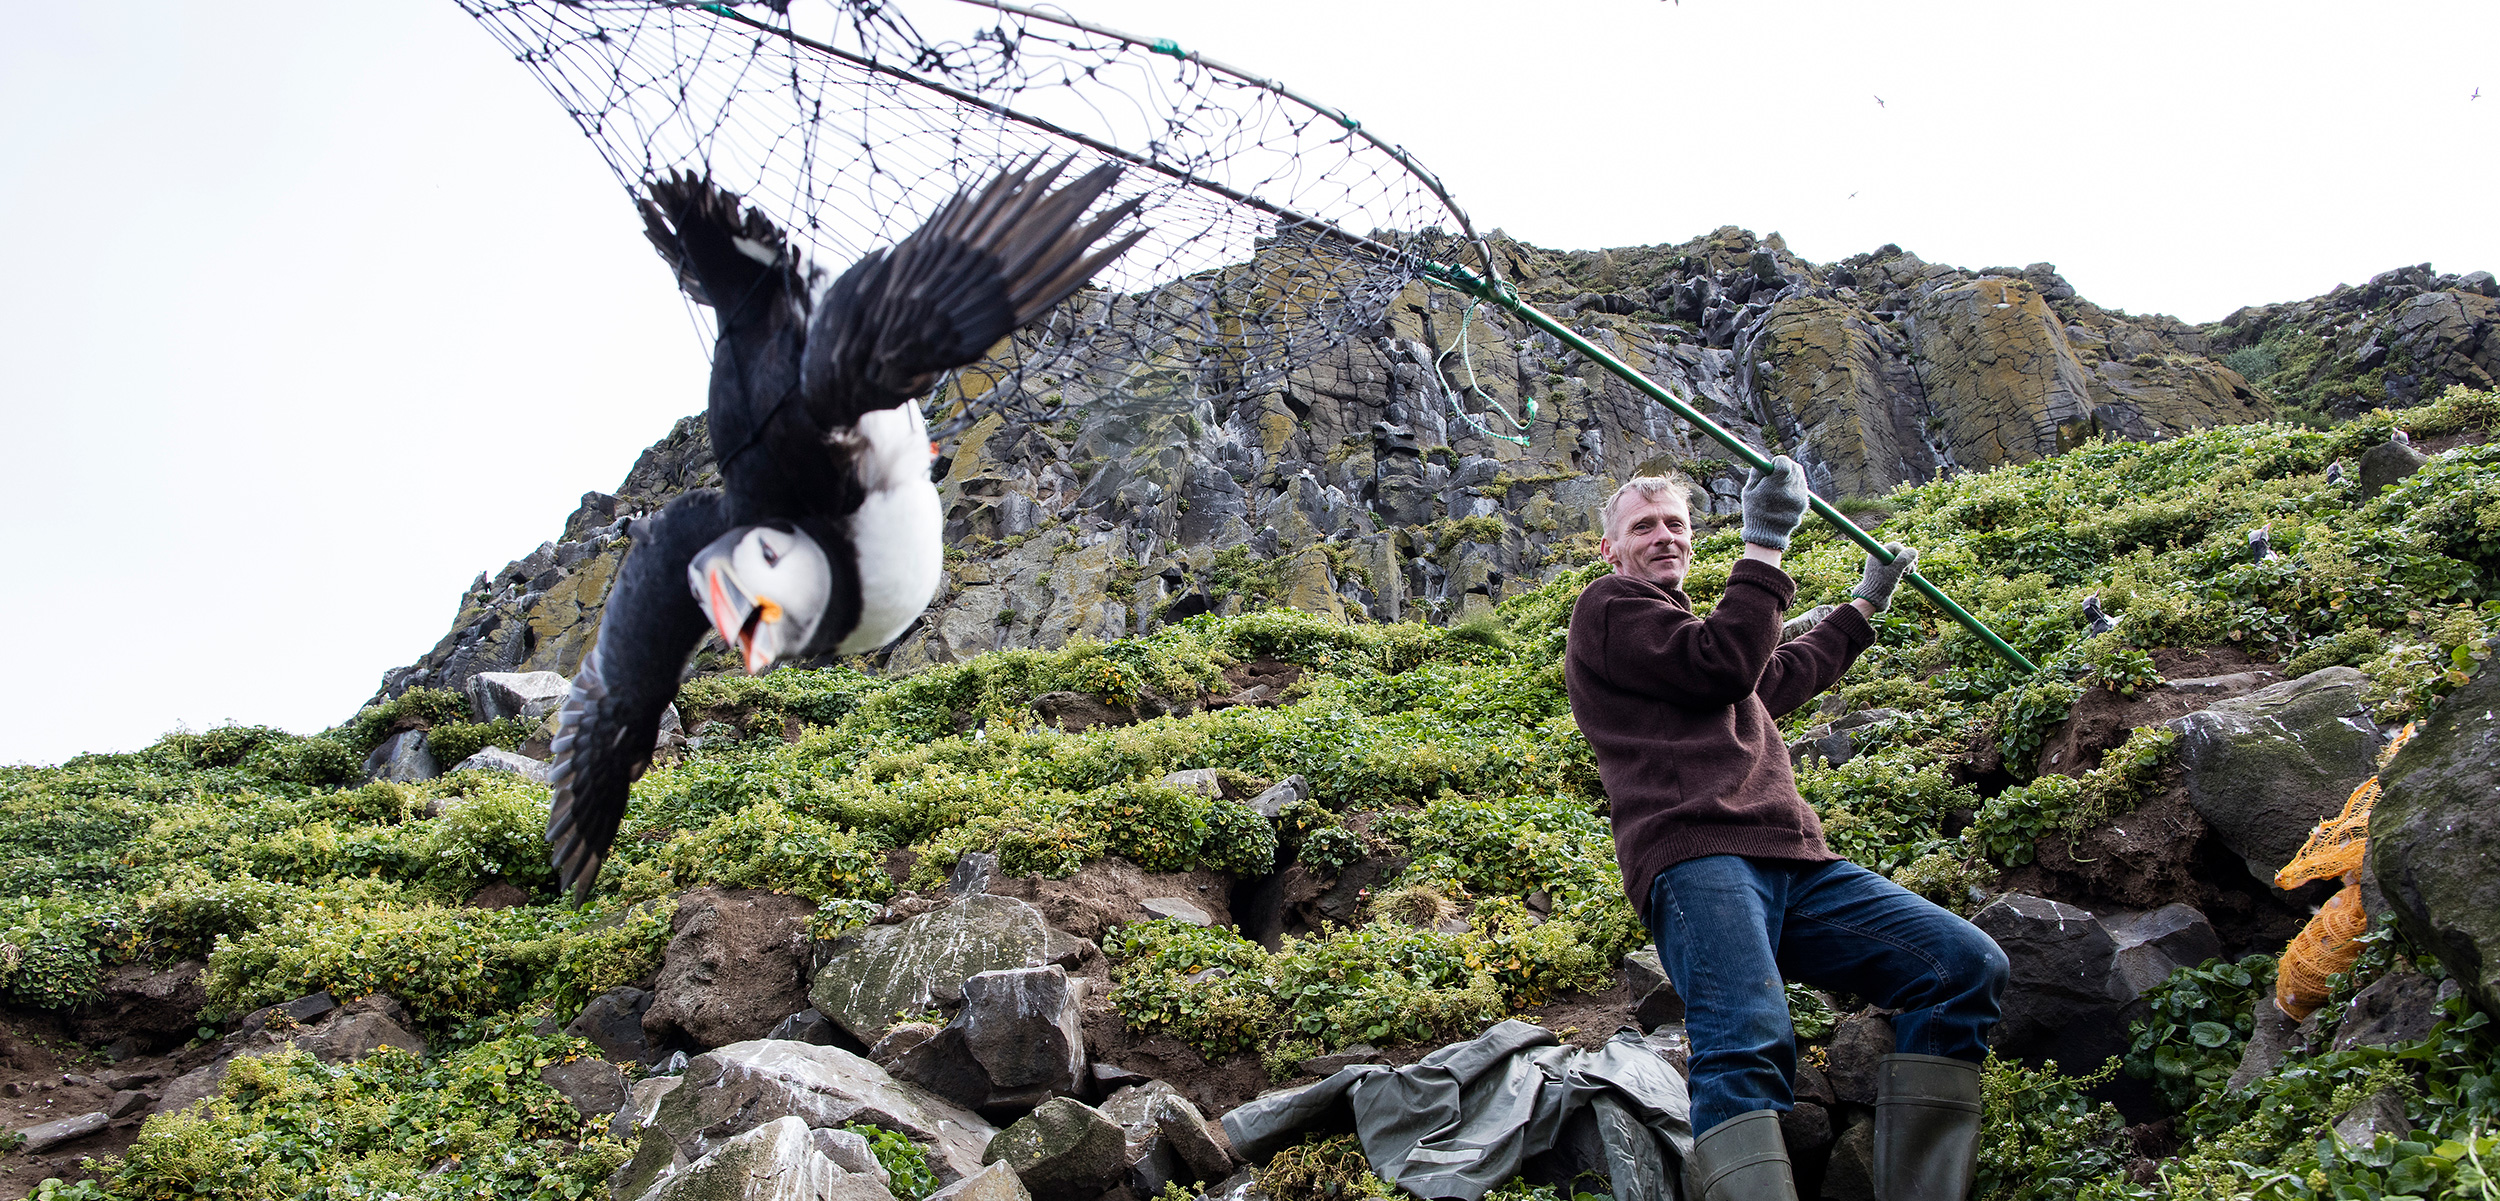 As his ancestors have done for generations, Icelander Árni Hilmarsson catches an Atlantic puffin in a net called a háfur. Photo by Carsten Egevang/atlanticseabirds.info